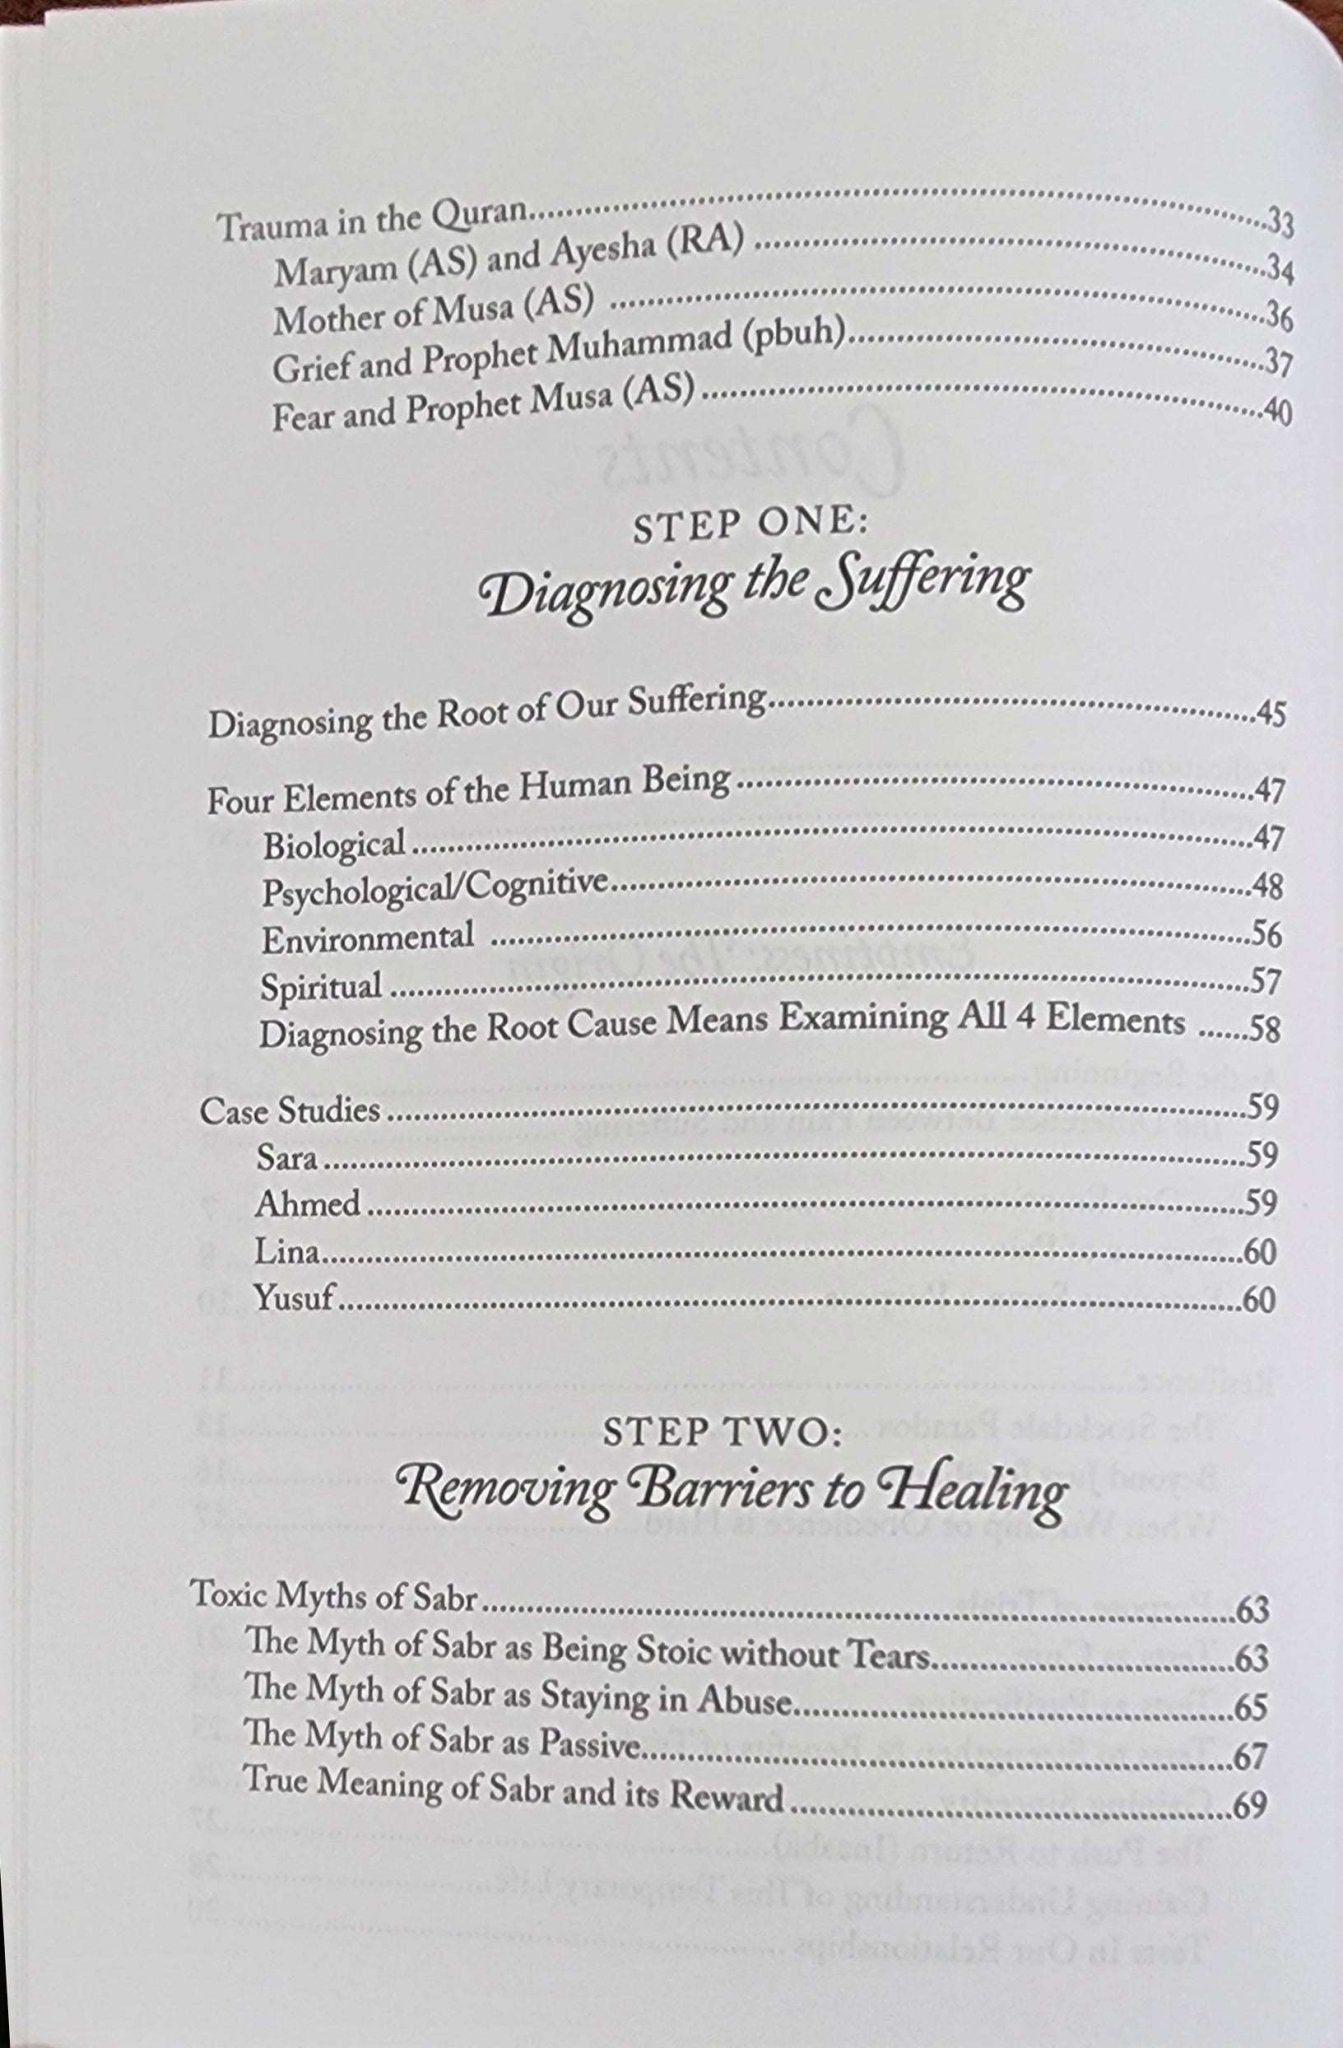 Healing the Emptiness - A Guide to Emotional and Spiritual Well - being - The Islamic Book Cafe LLC